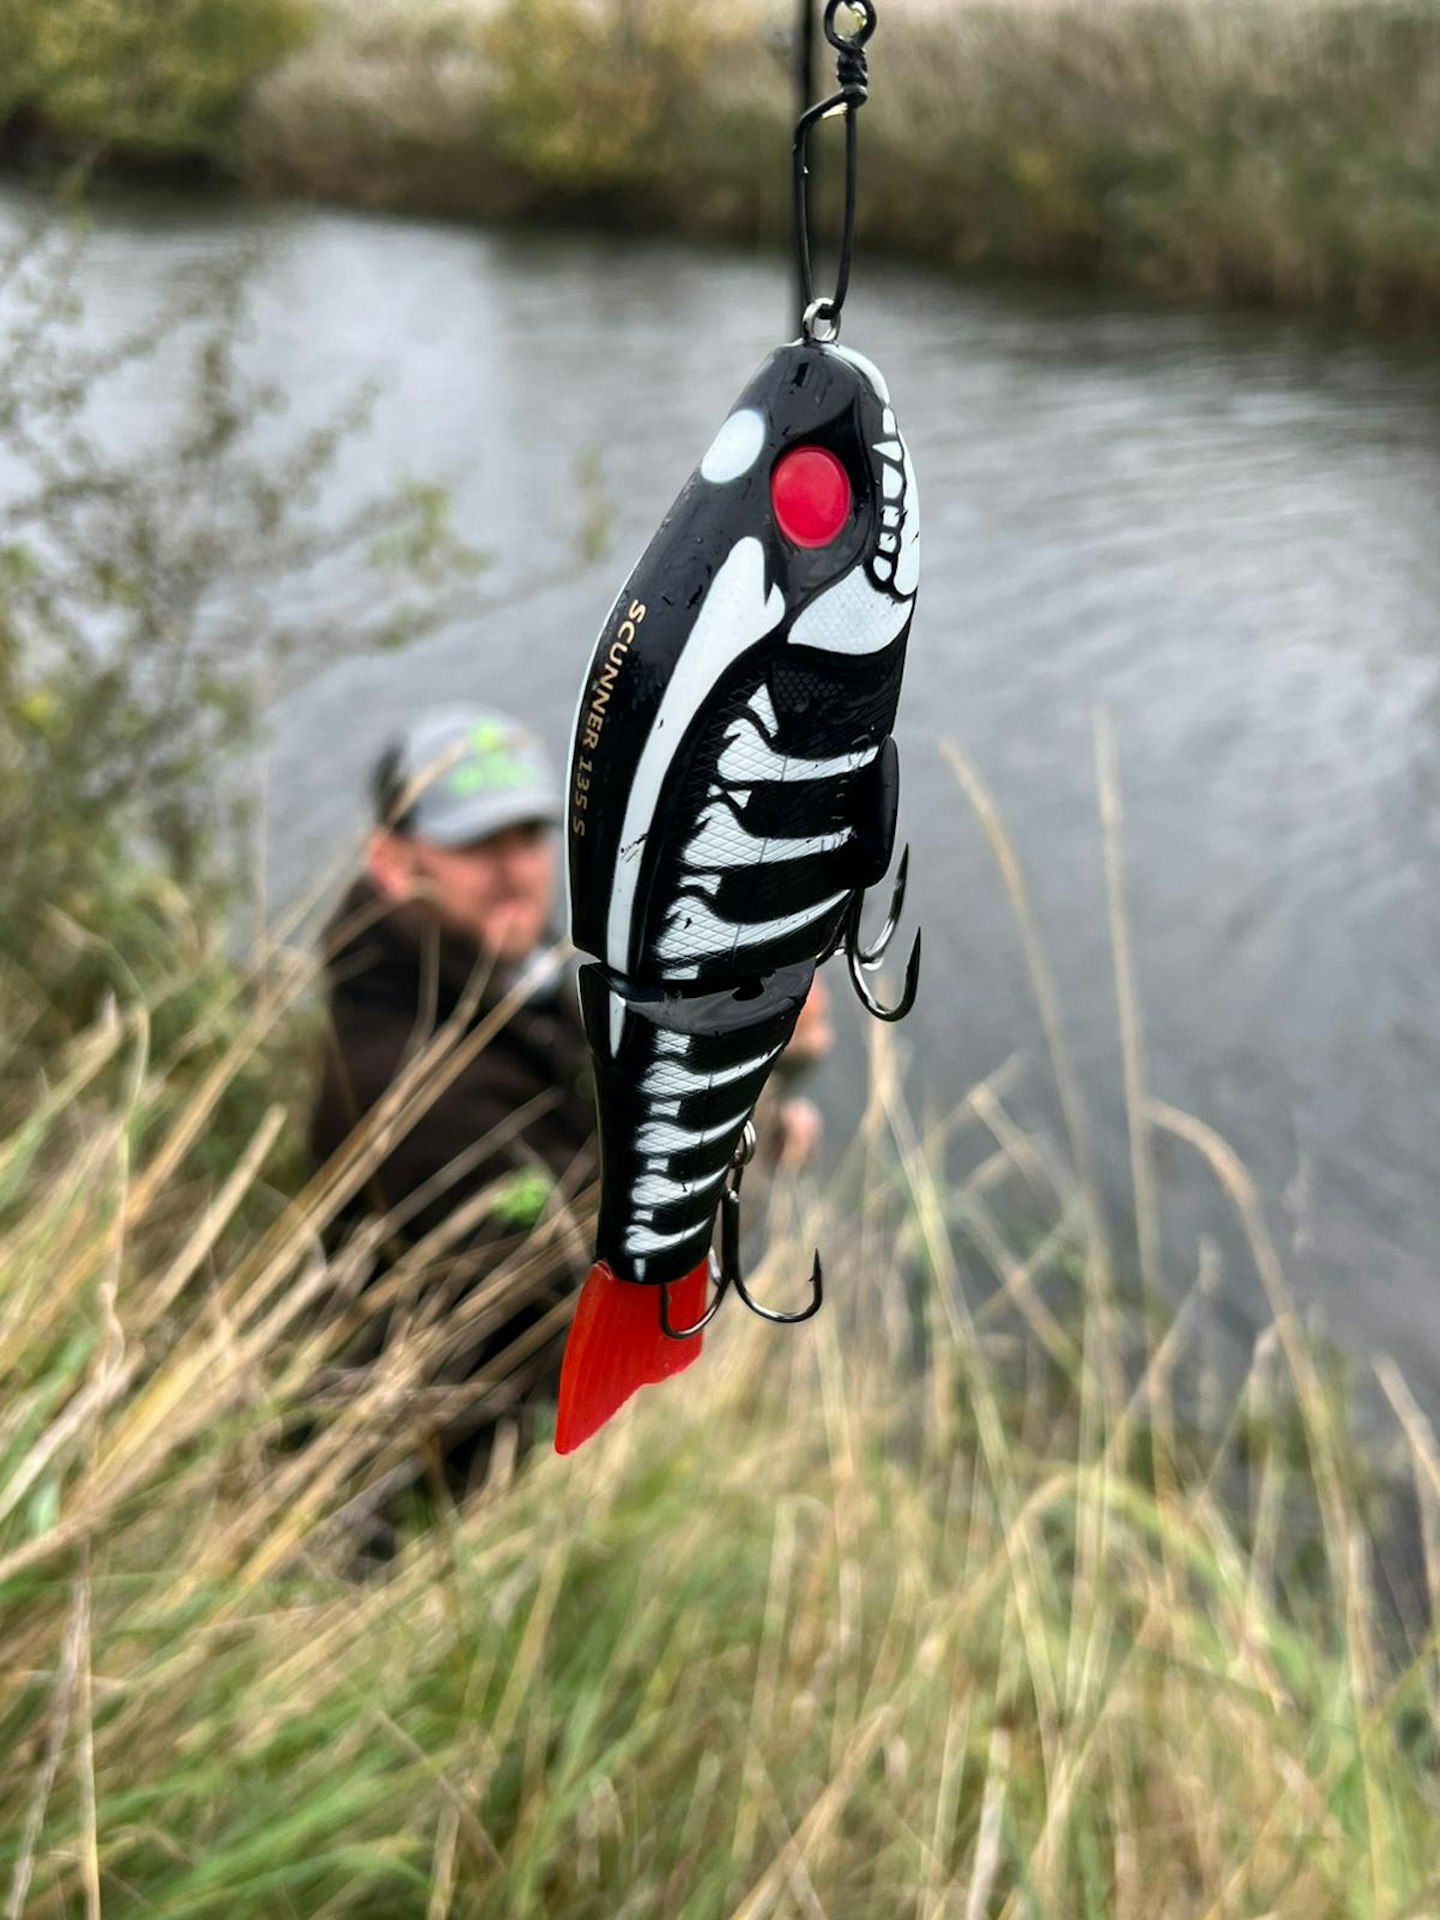 Top 5 Angling Essentials For Lure Fishing – With Predator Tackle